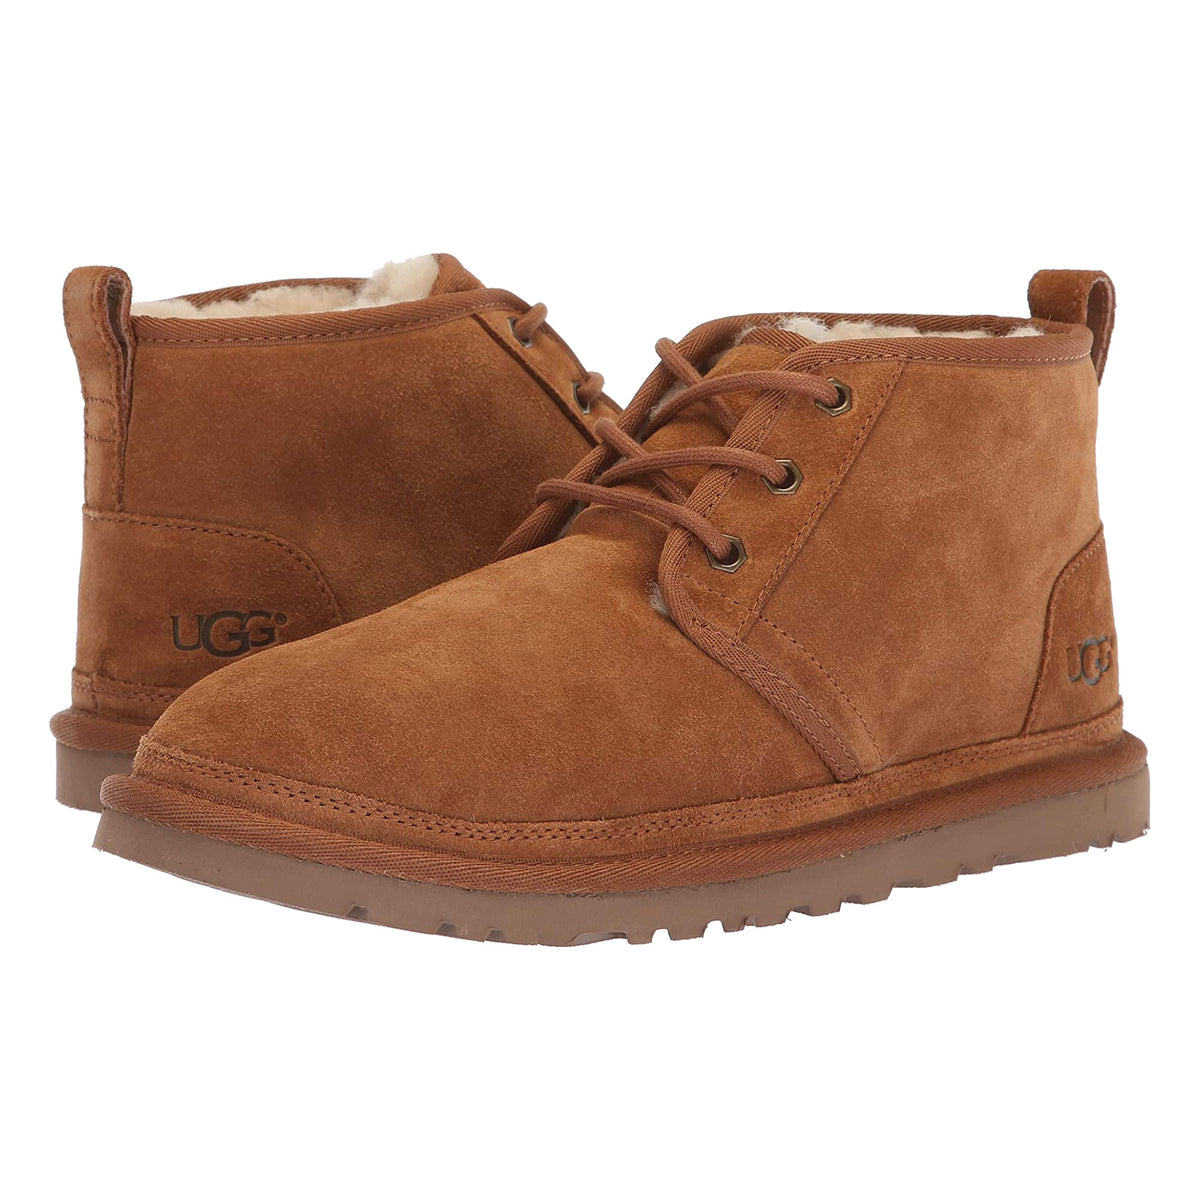 A pair of Ugg Neumel Chestnut chukka boots with a lace-up front and plush lining.